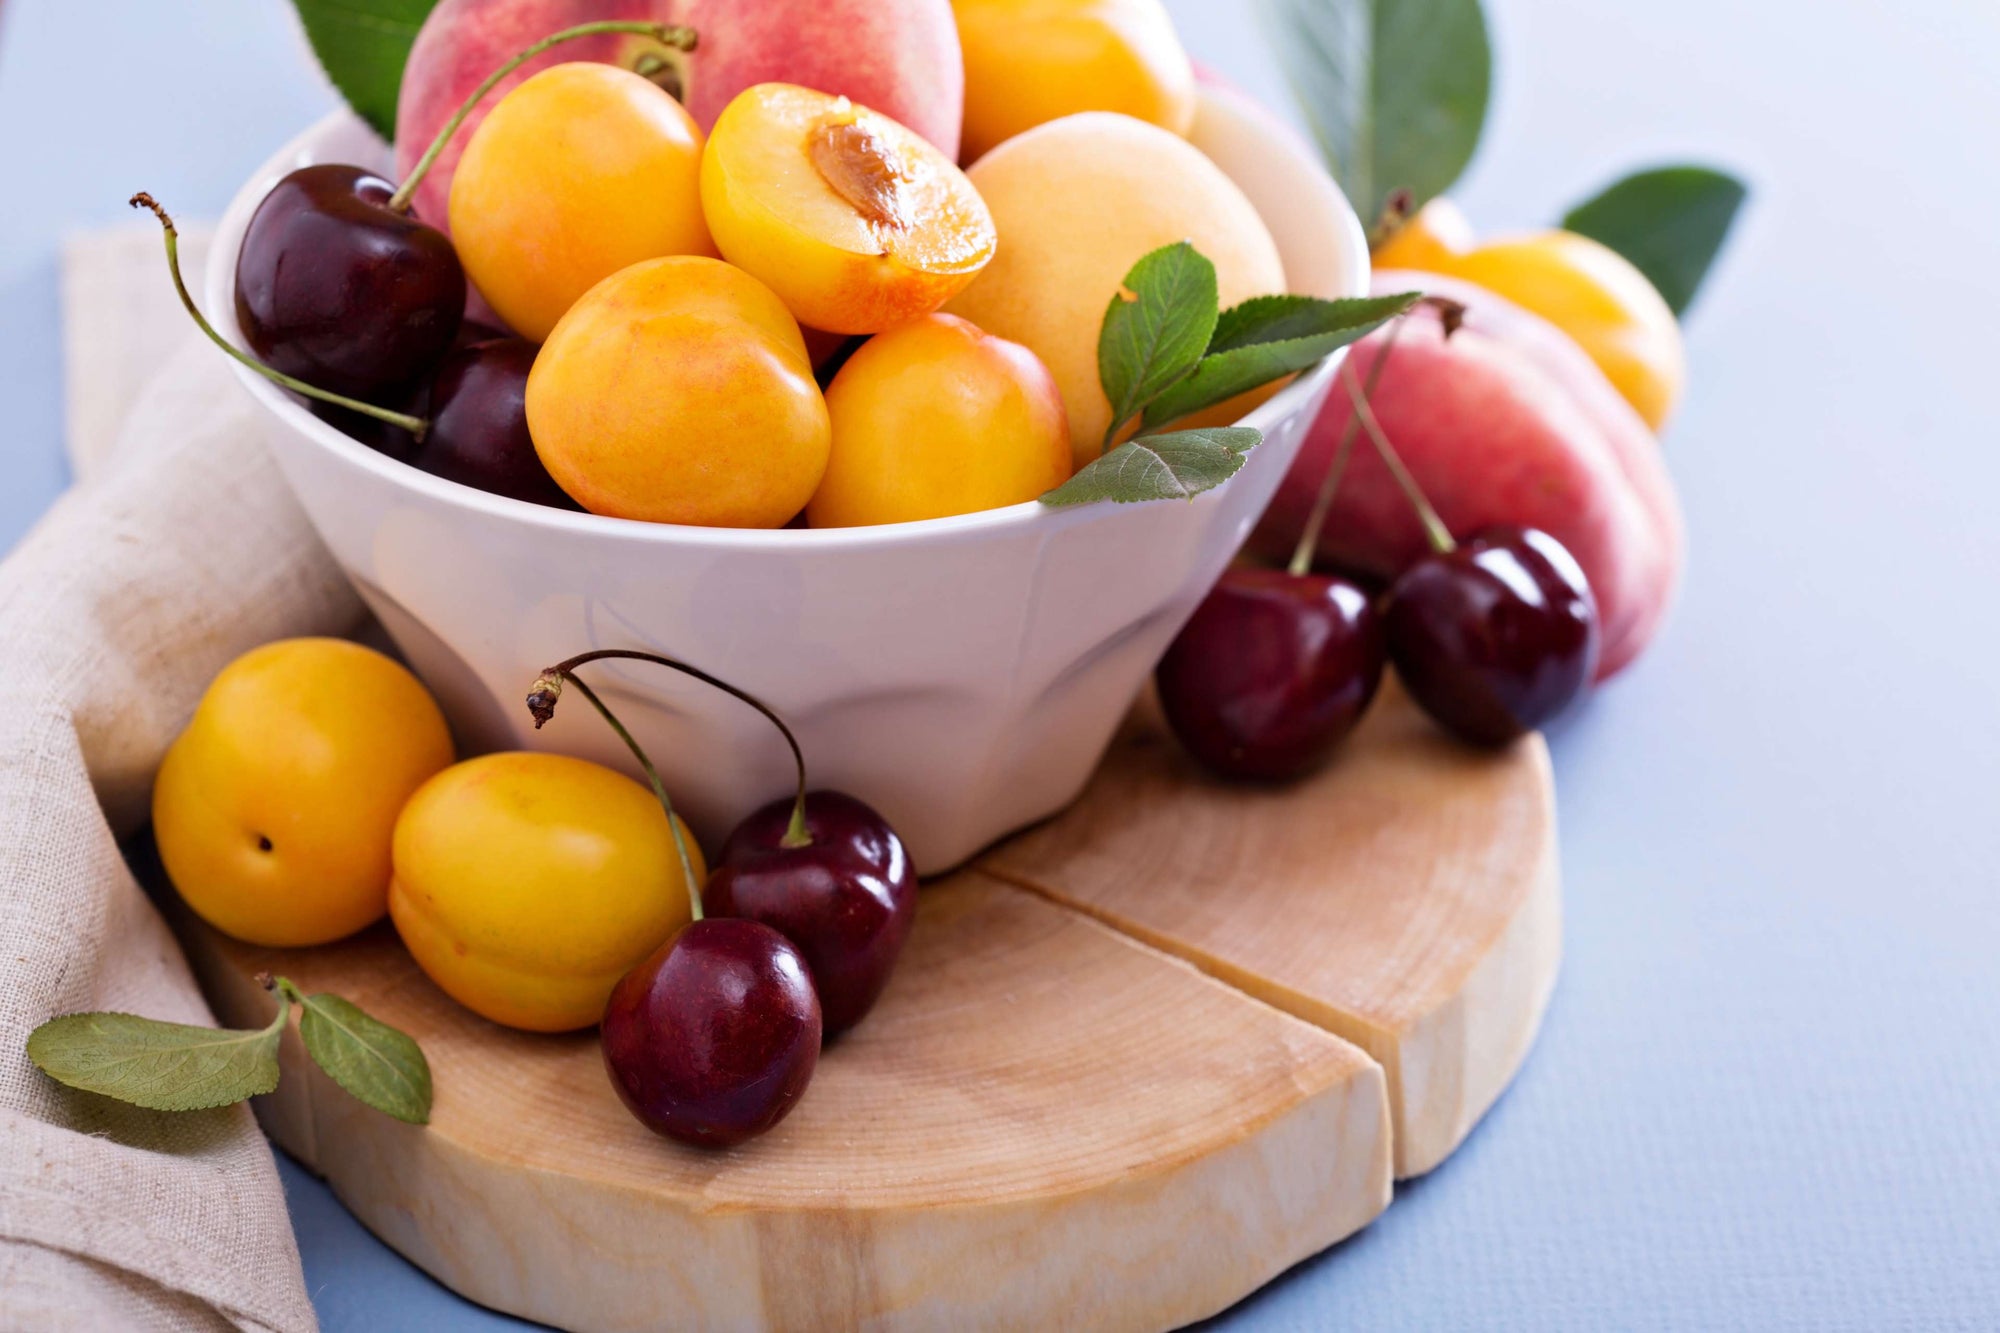 Eating Stone Fruits Reduces Health Risks